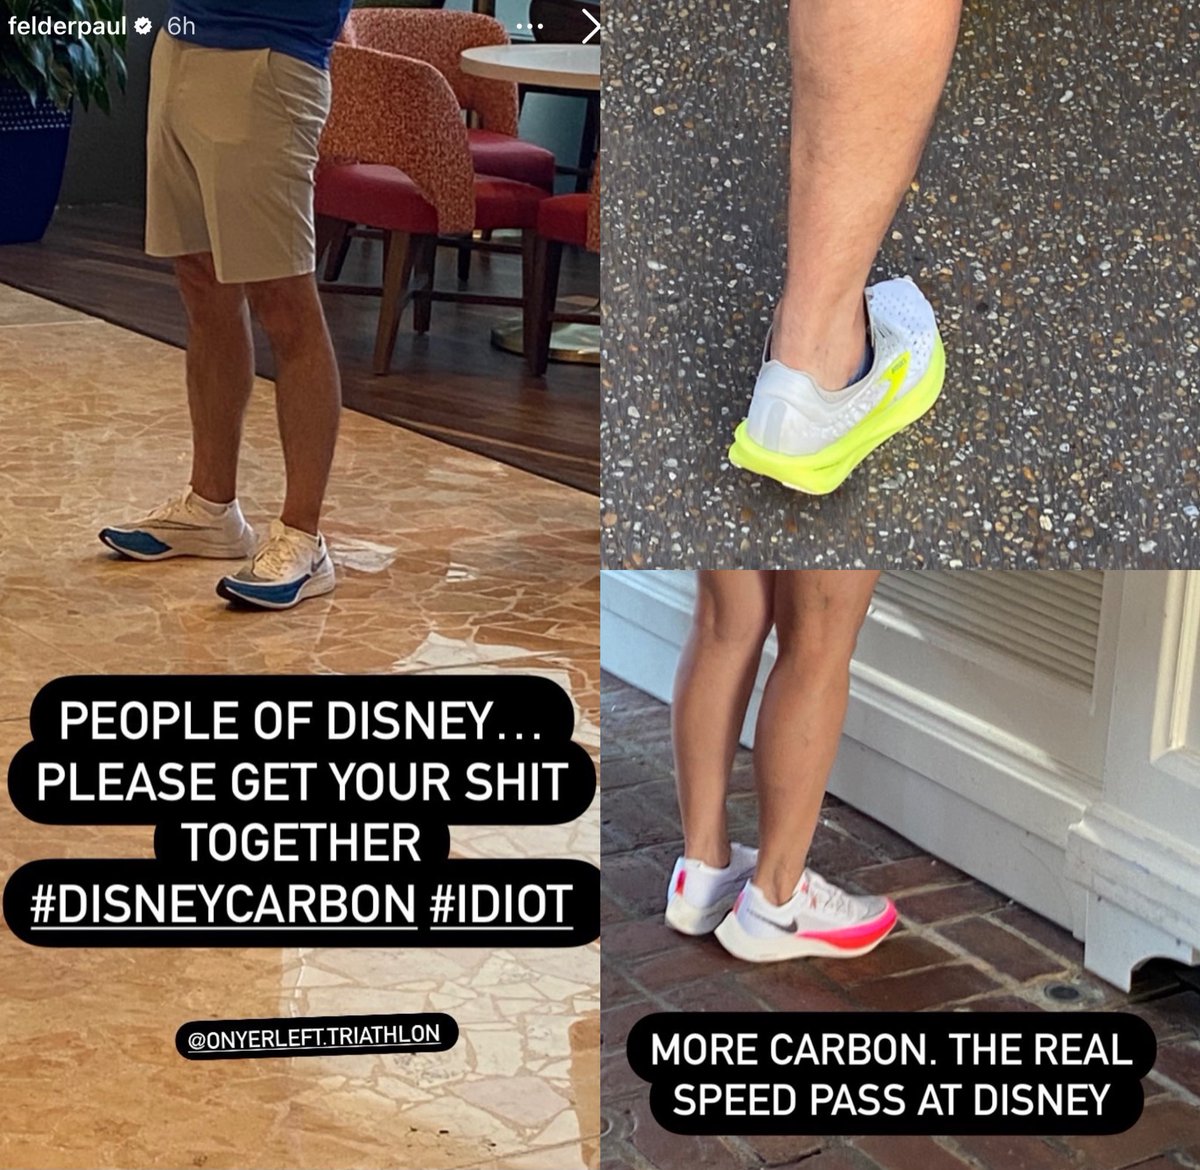 RT @UFC_Obsessed: Paul Felder documenting his hatred for the shoes people are wearing at Disney has been hilarious. https://t.co/wCV1jVyR5T